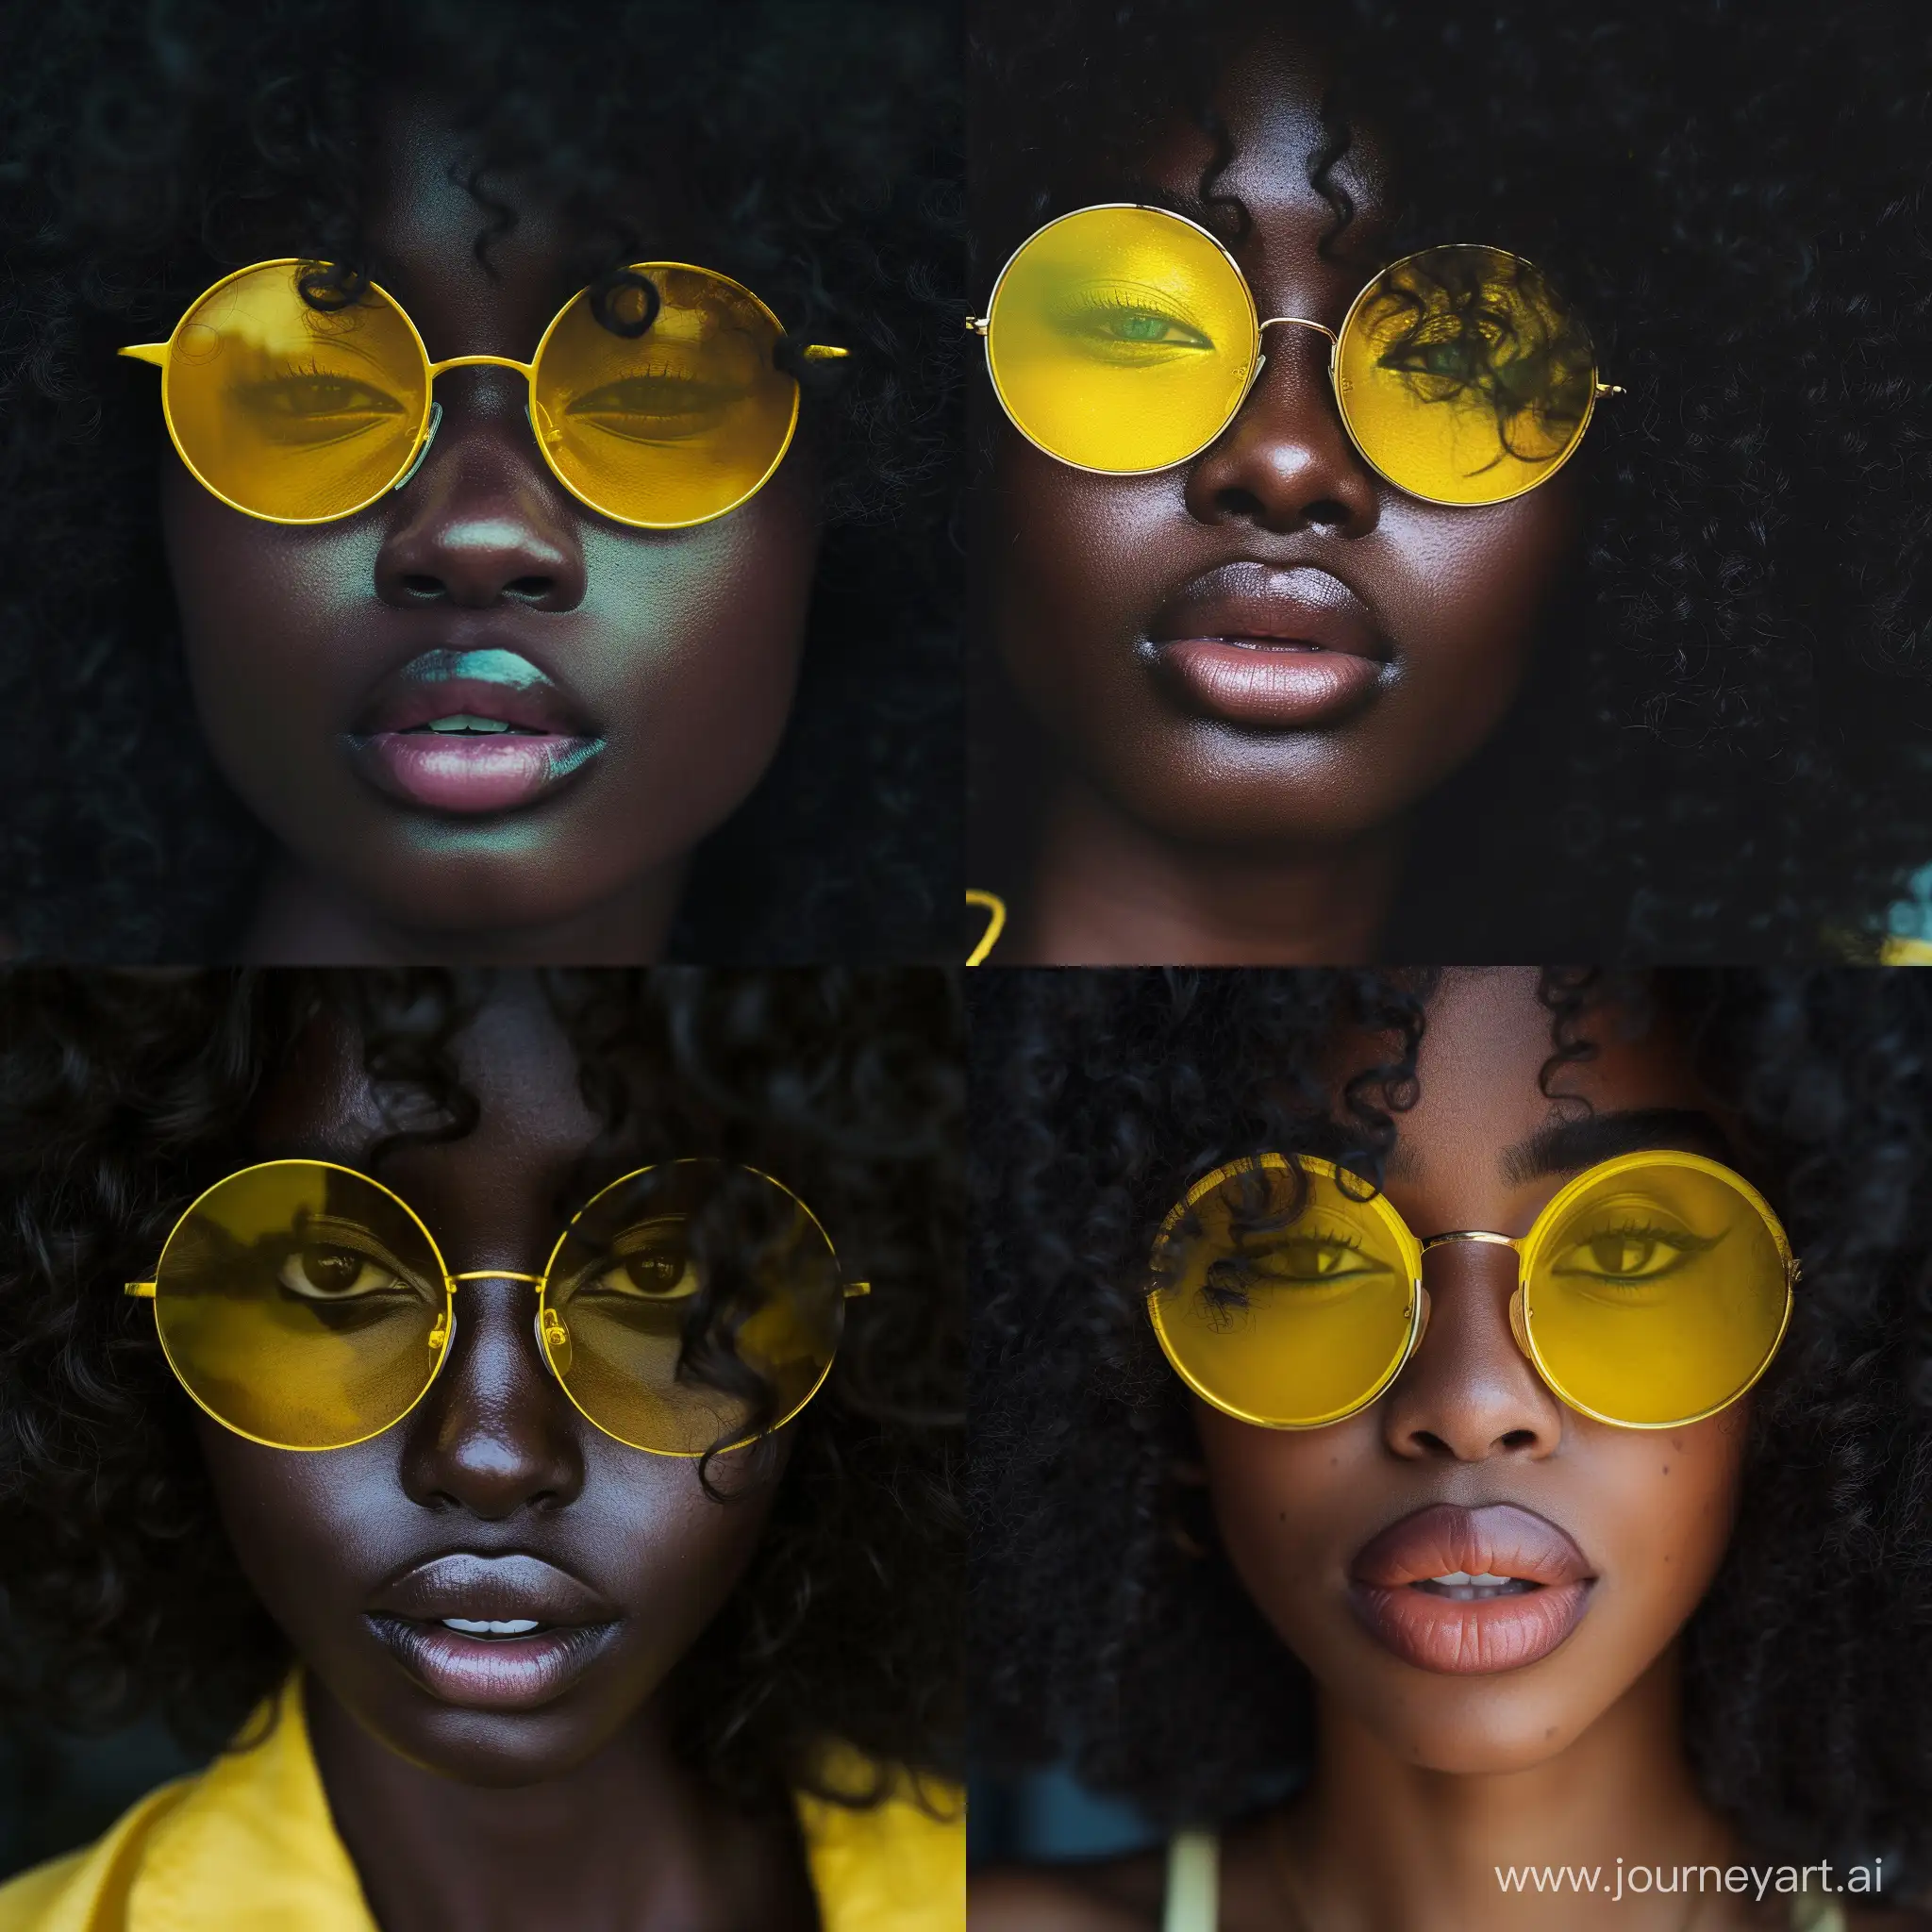 Closeup-Portrait-of-Stylish-Black-Woman-with-Yellow-Round-Sunglasses-and-Voluminous-Curly-Hair